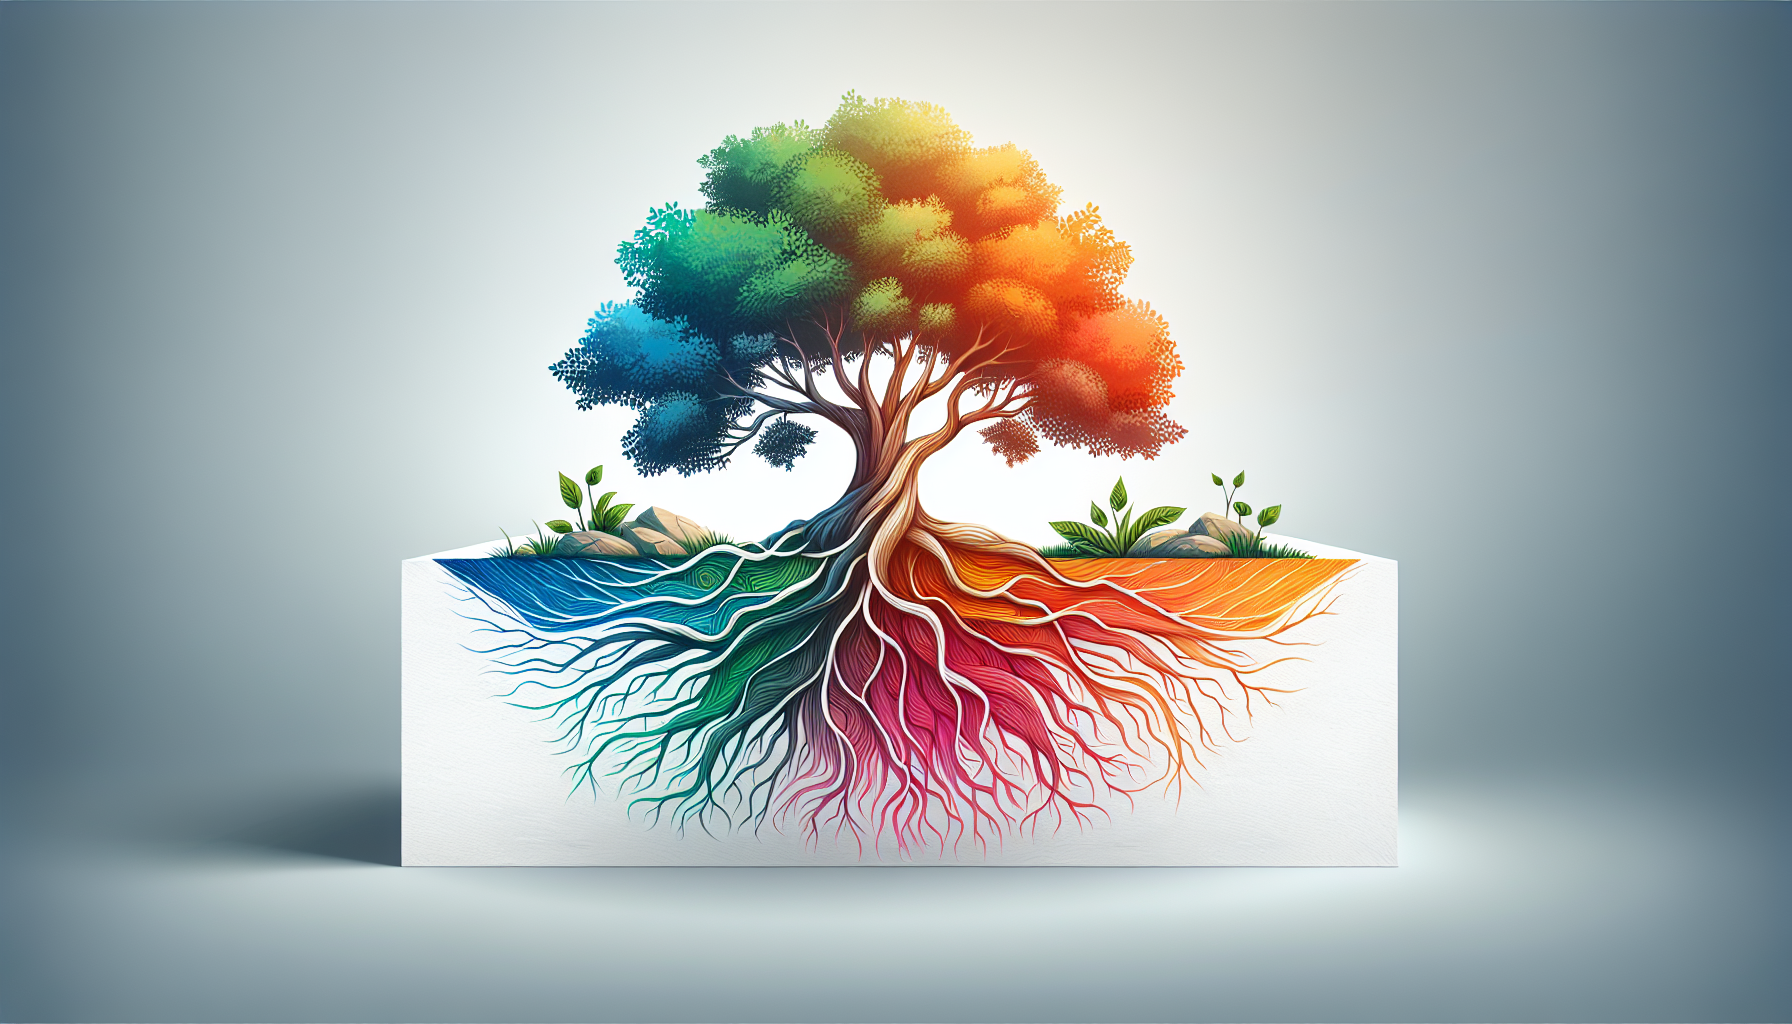 Show a healthy tree with strong roots, symbolizing a healthy organization with a strong foundation a